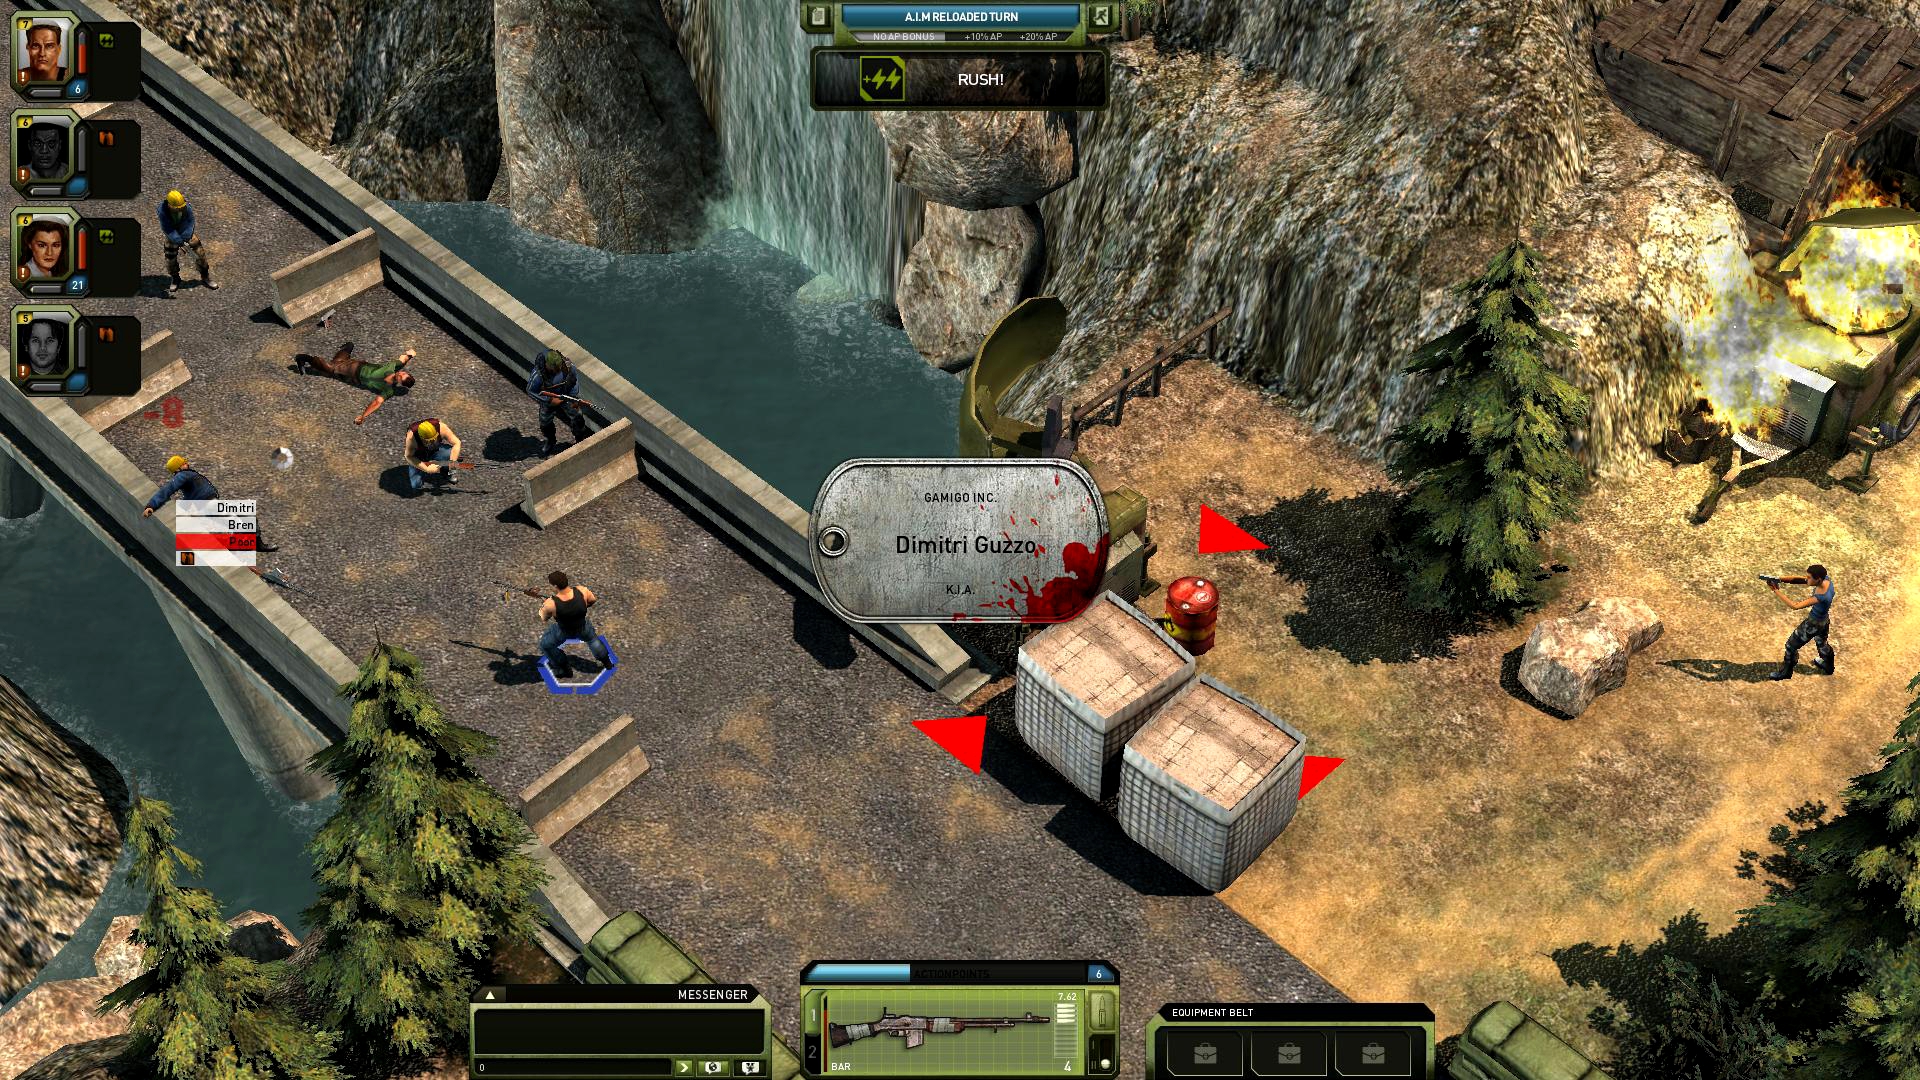 download release jagged alliance 3